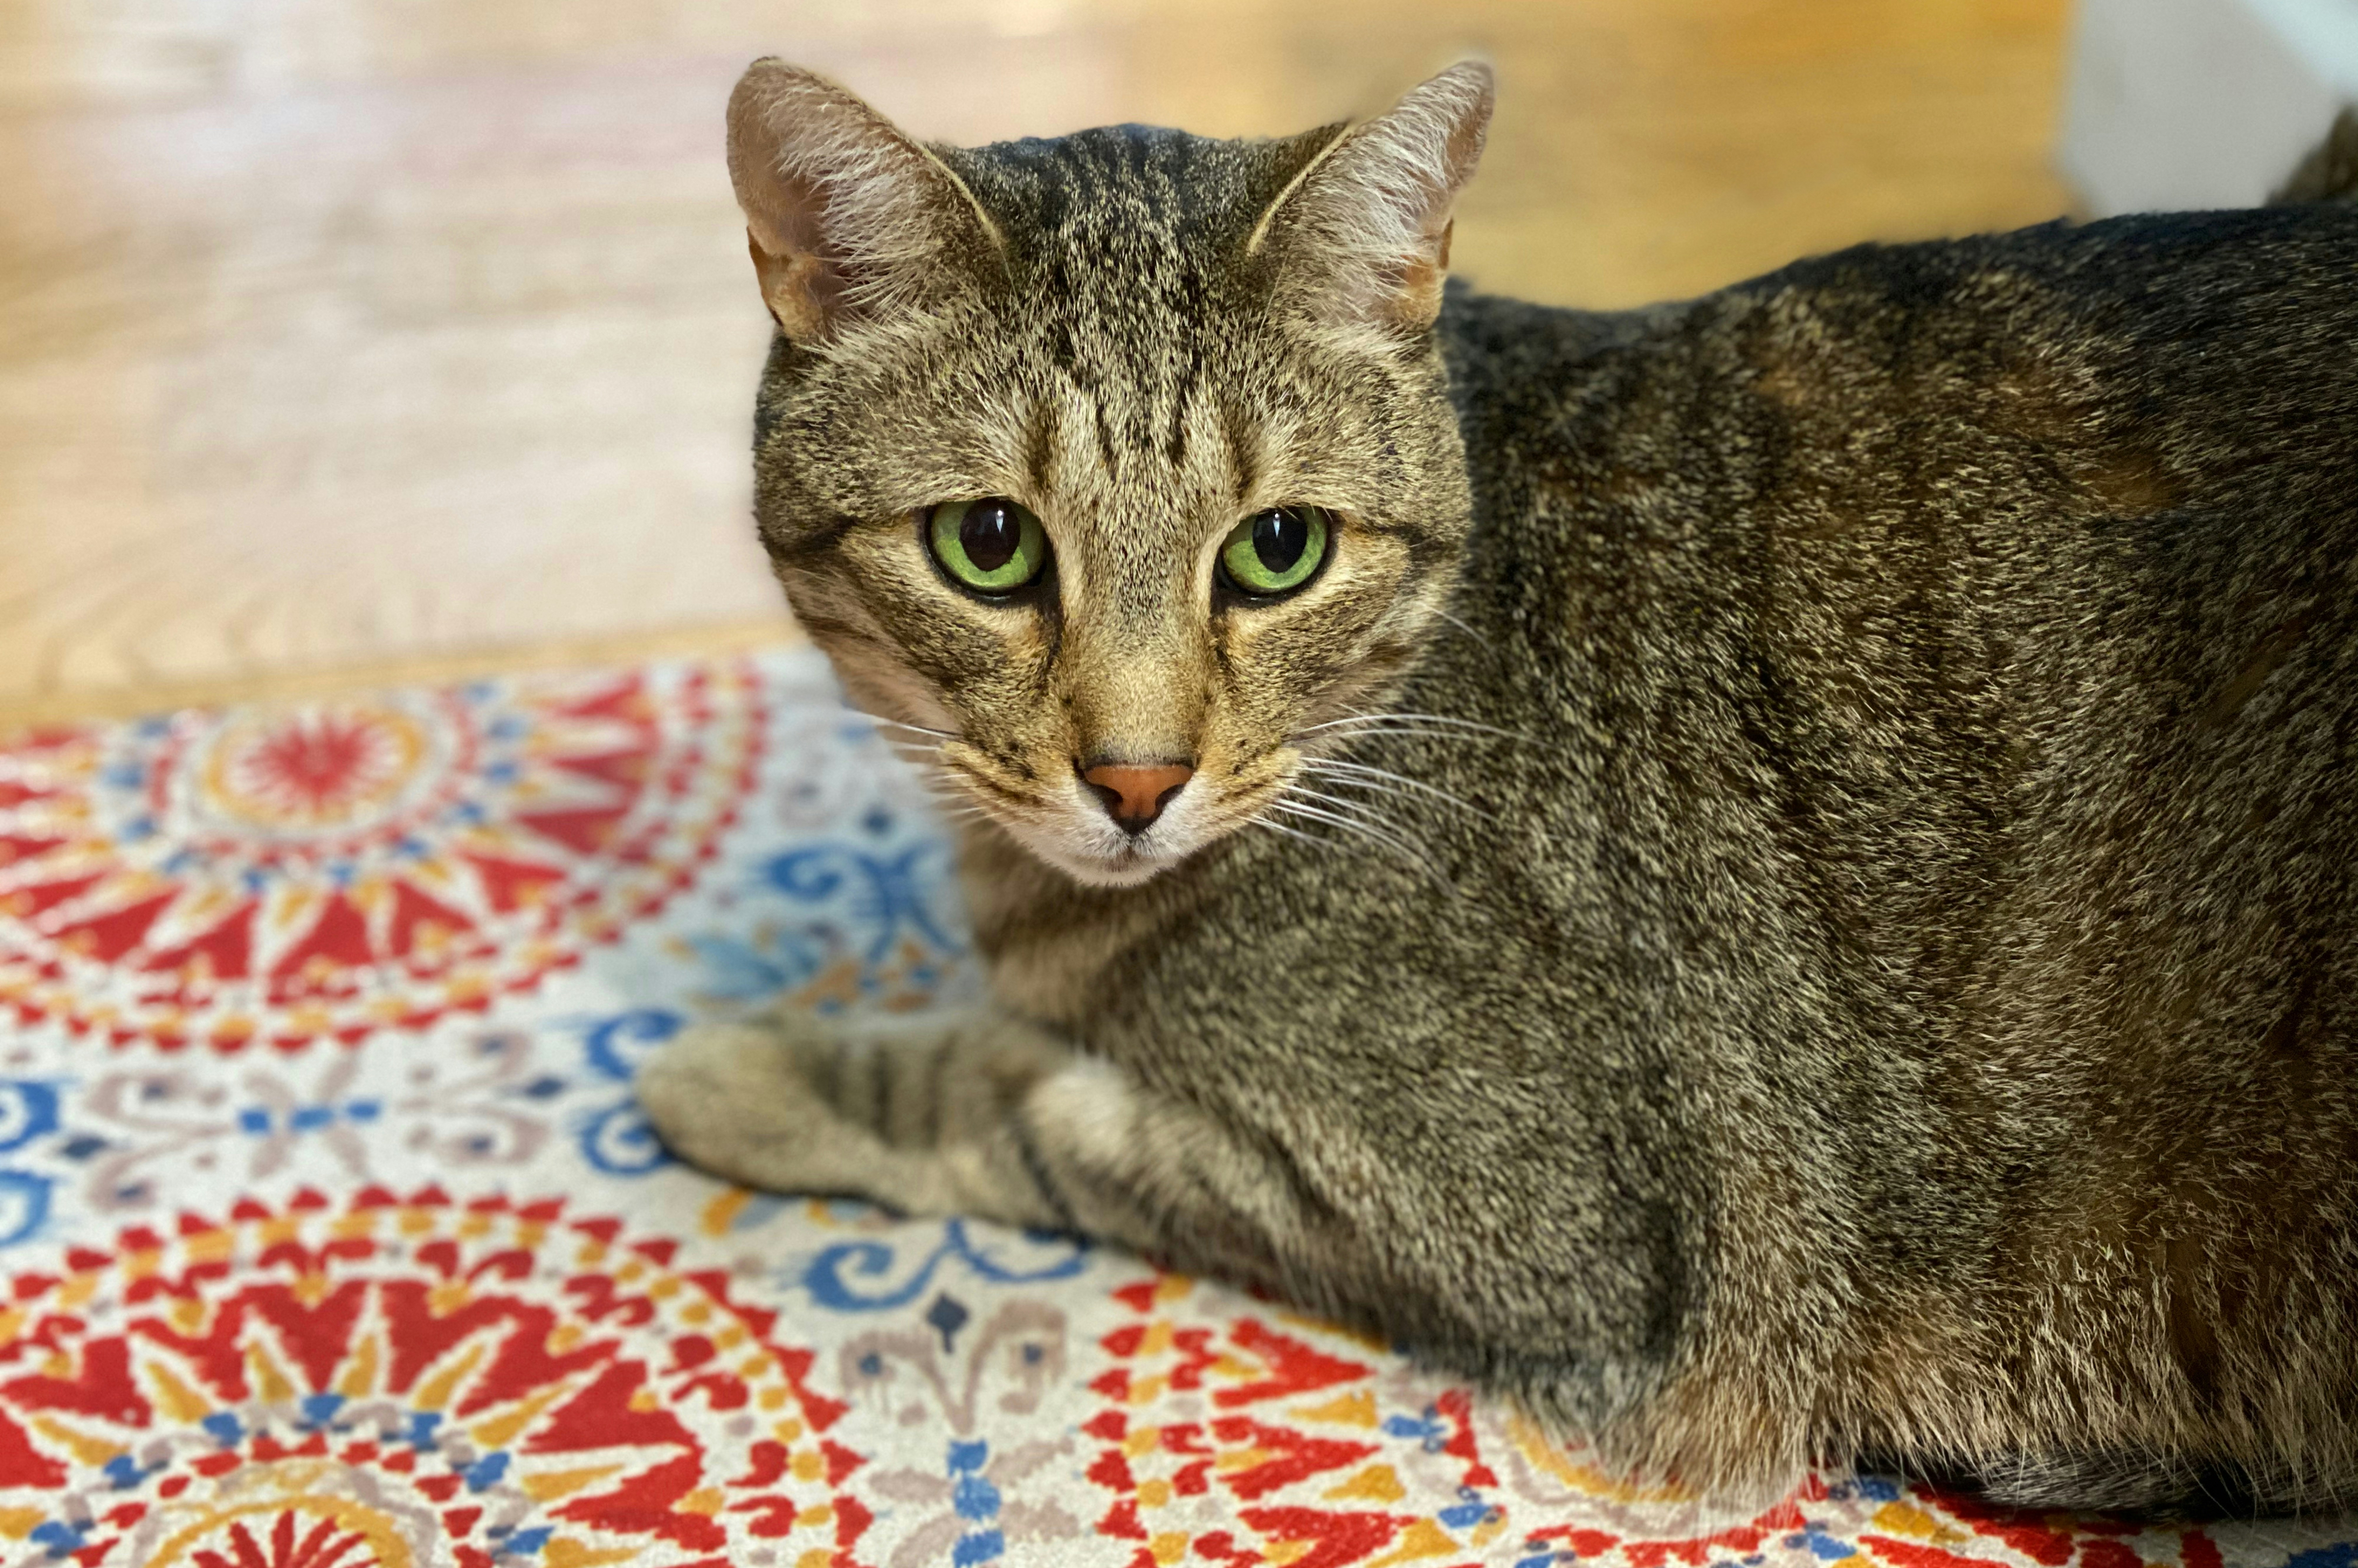 A house cat with beautiful green eyes comfortably rests on a decorative mat.